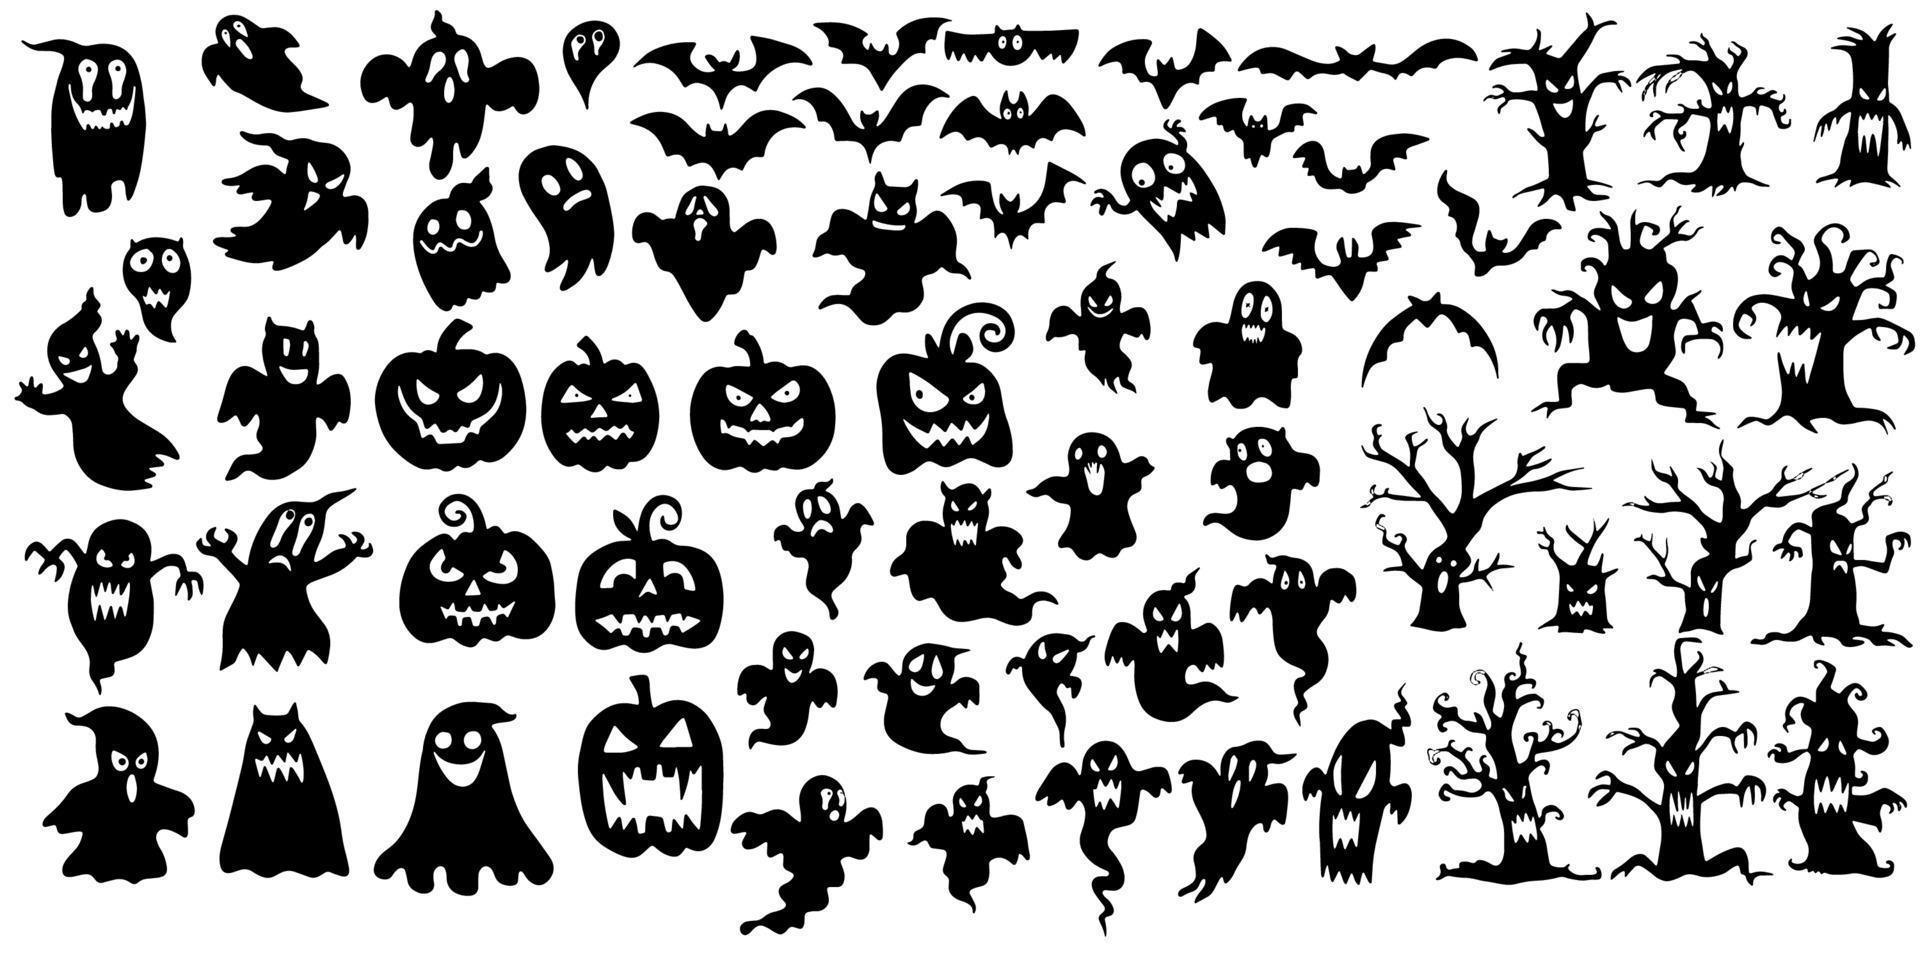 Collection of halloween silhouettes icon and character, elements for halloween decorations Premium Vector